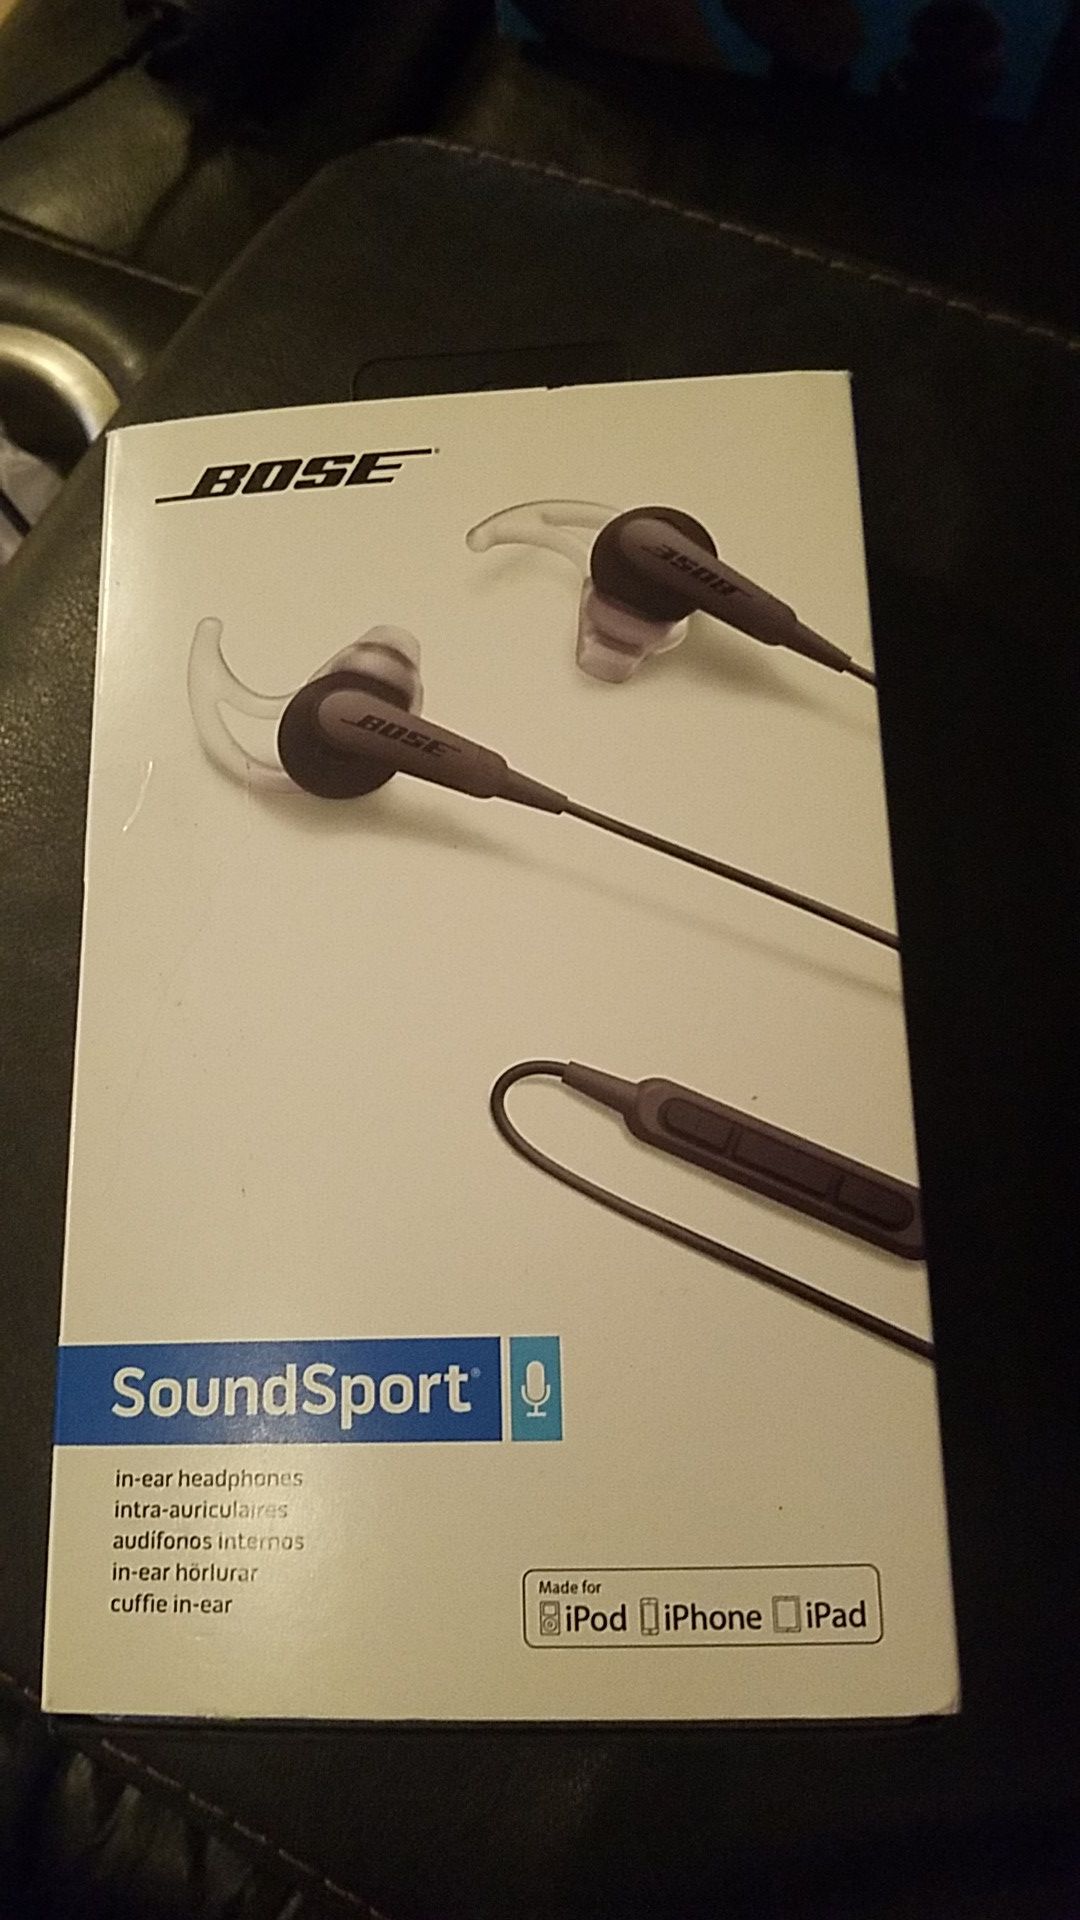 Bose SoundSport In-ear Wired Headphones - Charcoal Black For: IPhone, IPad, IPod